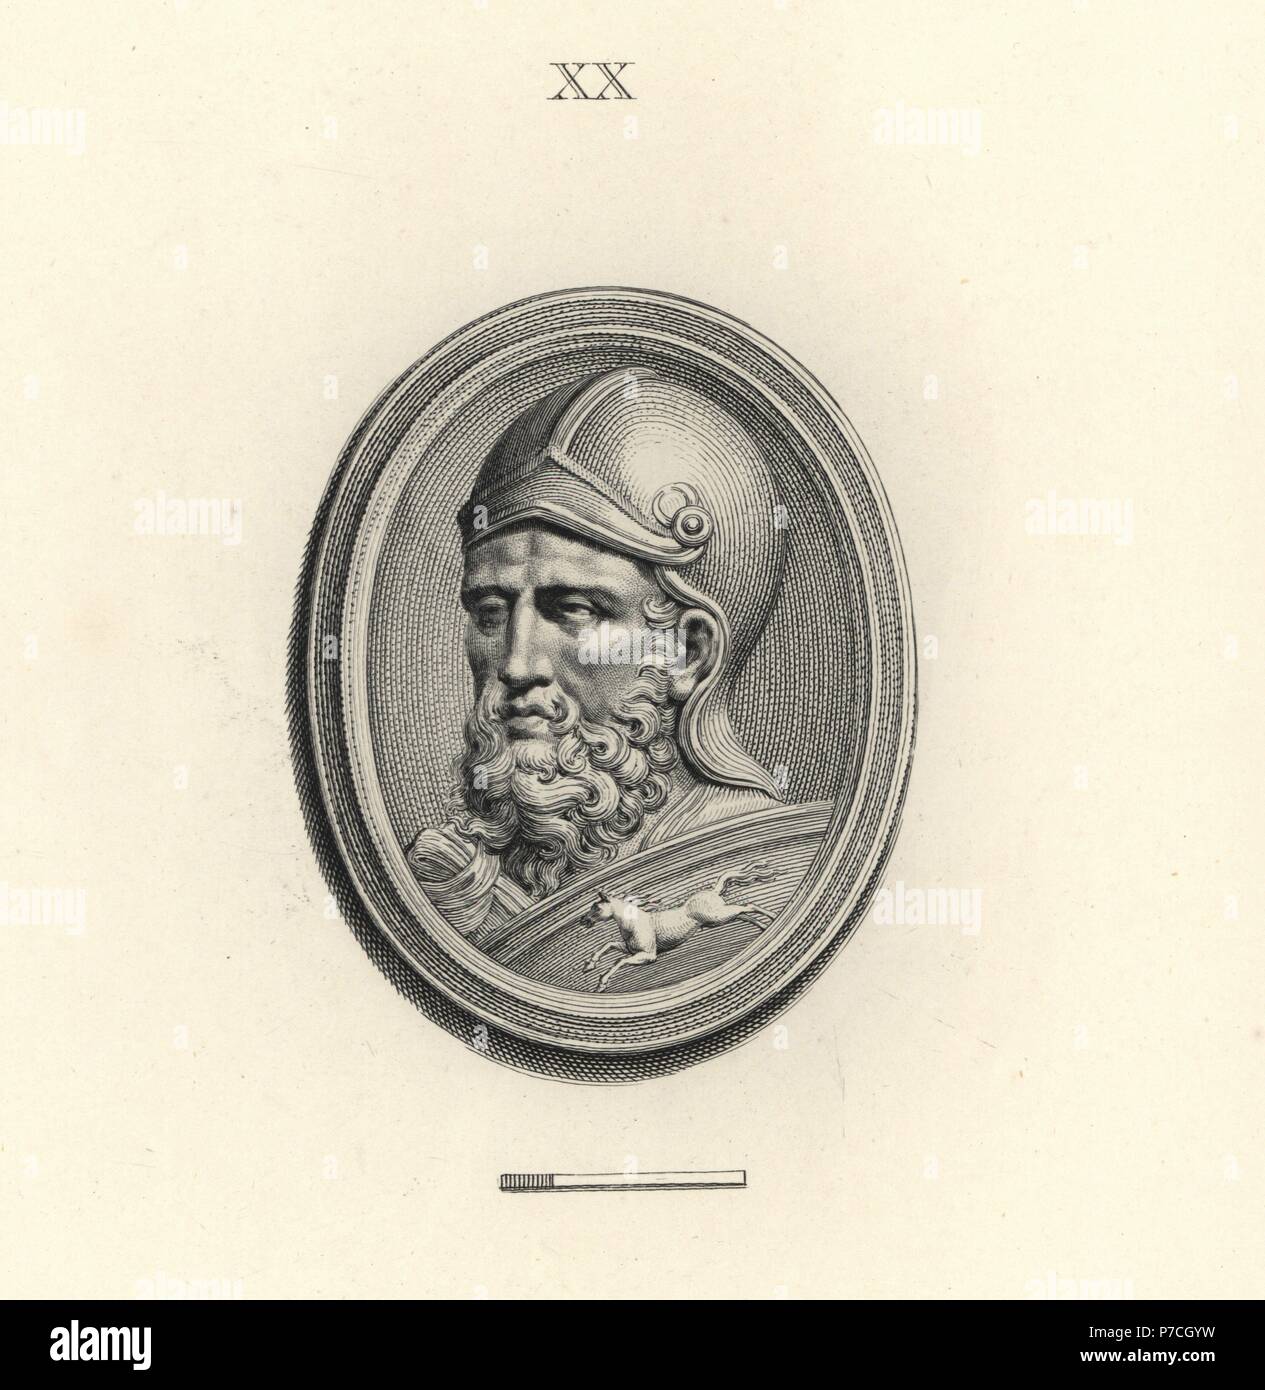 Head of Hannibal, Punic Carthaginian military commander, in helmet and shield decorated with galloping horse. Copperplate engraving by Francesco Bartolozzi from 108 Plates of Antique Gems, 1860. The gems were from the Duke of Marlborough's collection. Stock Photo